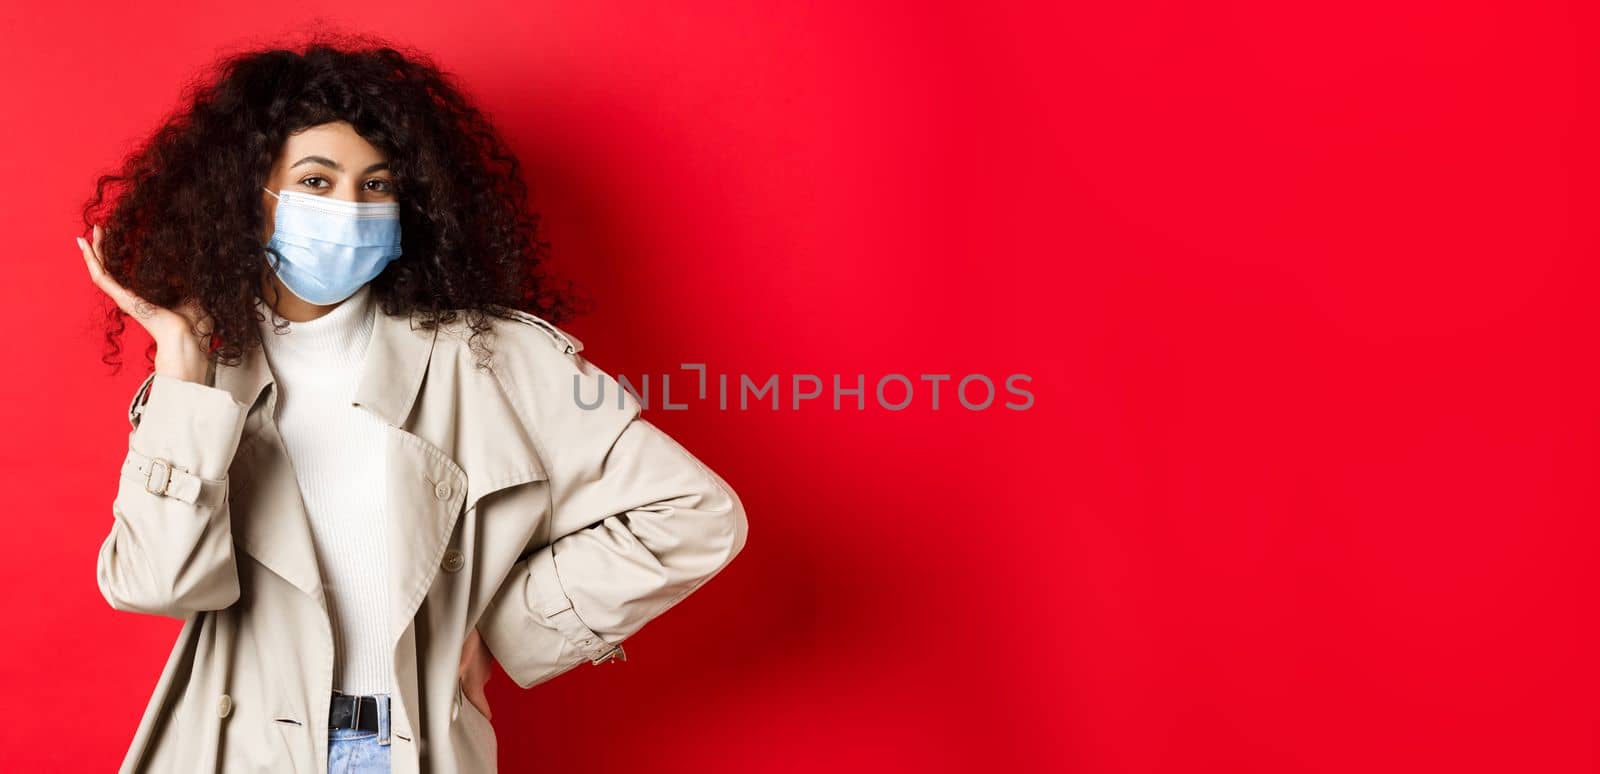 Covid-19, pandemic and quarantine concept. Stylish coquettish woman in medical mask and trench coat, fixing her curly hairstyle and smiling, red background.